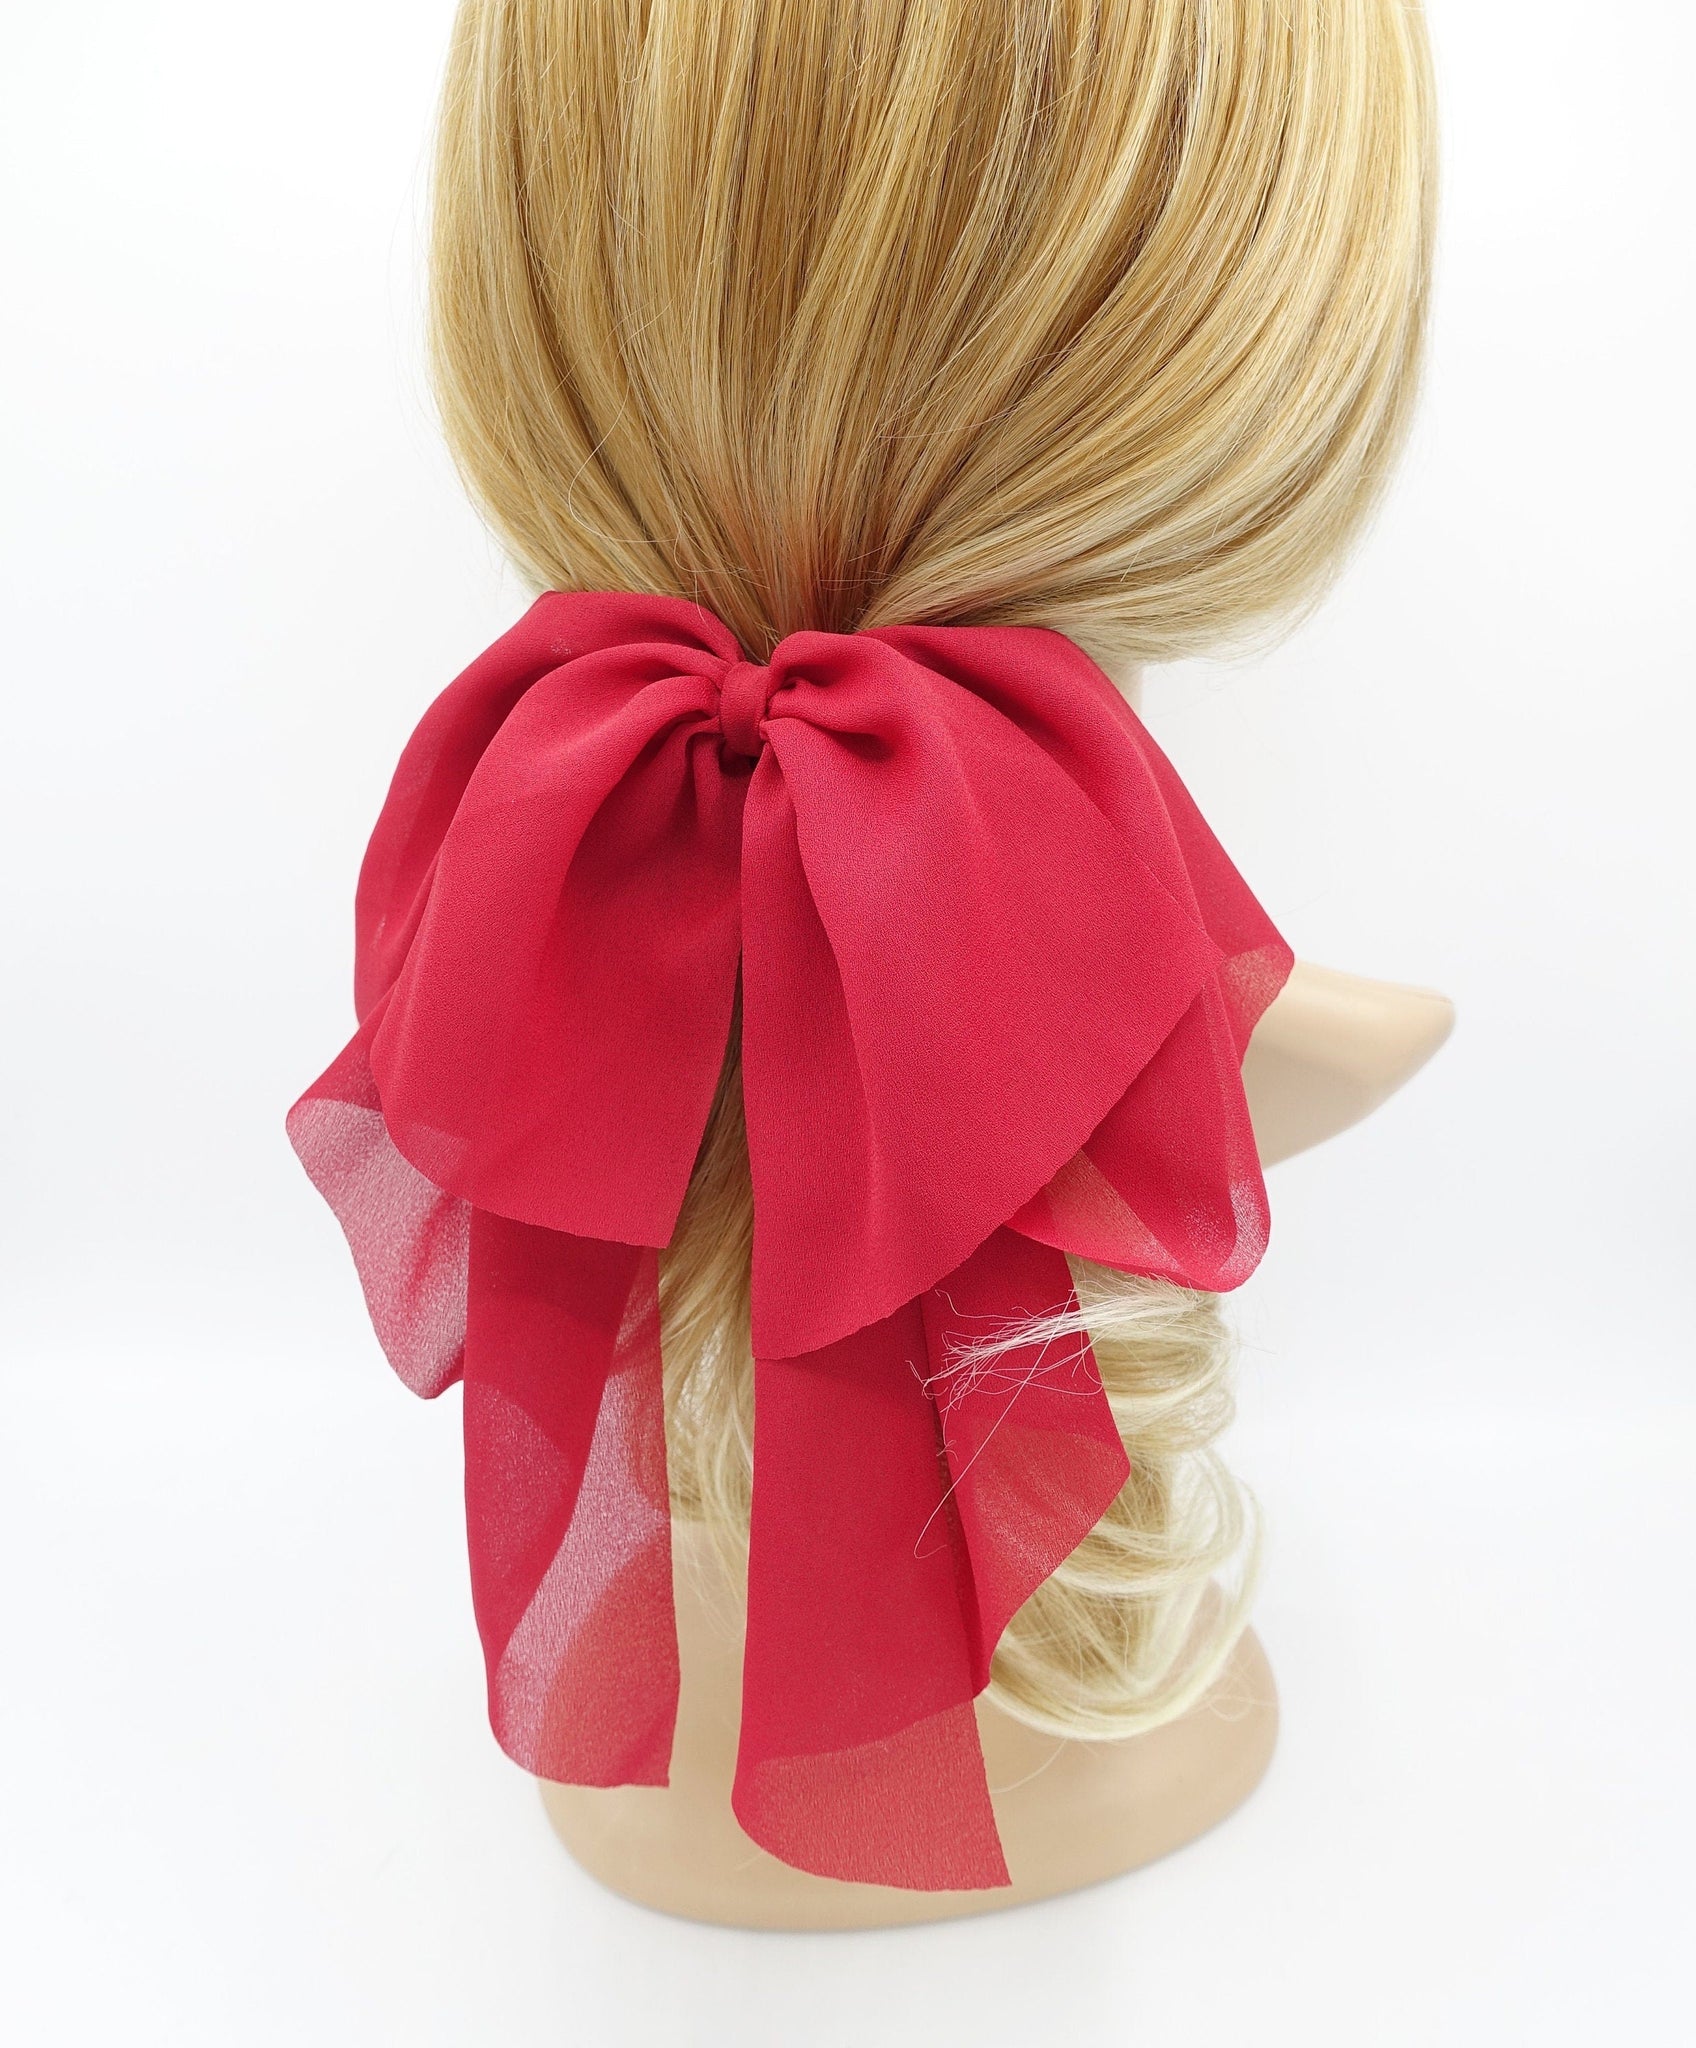 veryshine.com Red chiffon droopy hair bow sheer hair accessory for women